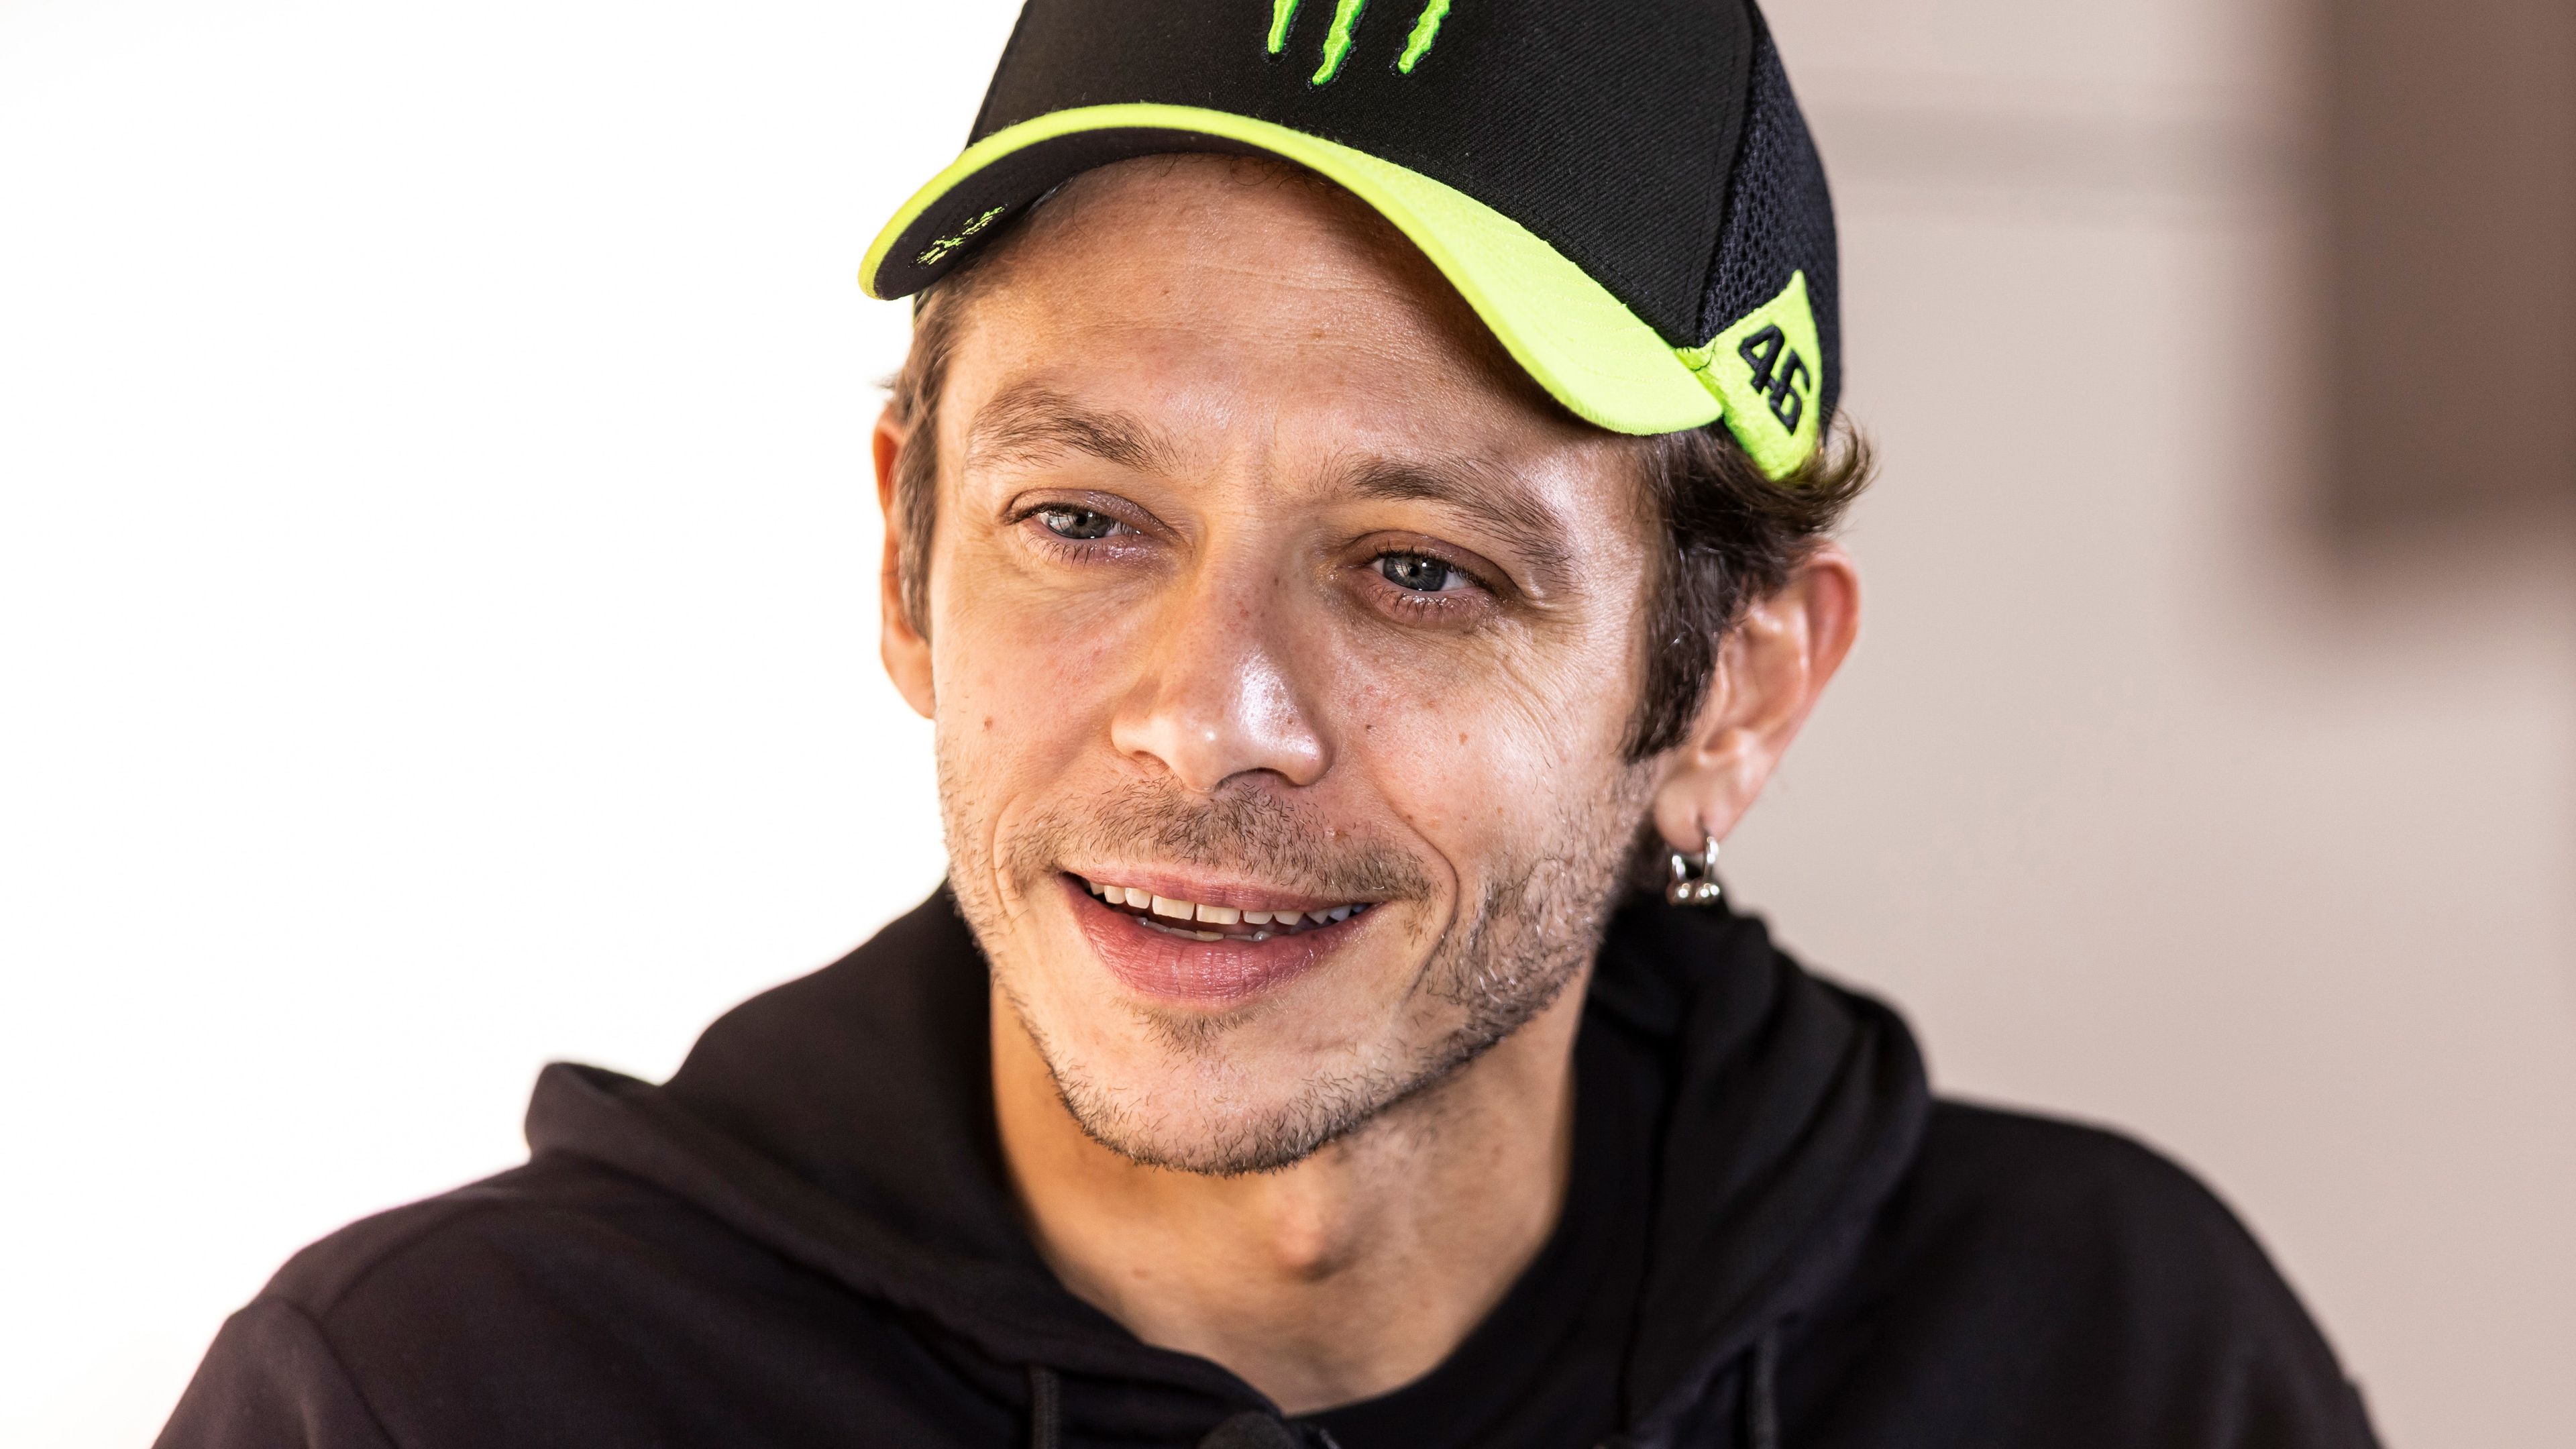 The italian driver of Audi Team WRT Valentino Rossi attends a press conference during the Fanatec GT World Challenge Europe at Circuit de Barcelona Catalunya on September 30, 2022 in Barcelona, Spain. (Photo by Xavier Bonilla/NurPhoto via Getty Images)